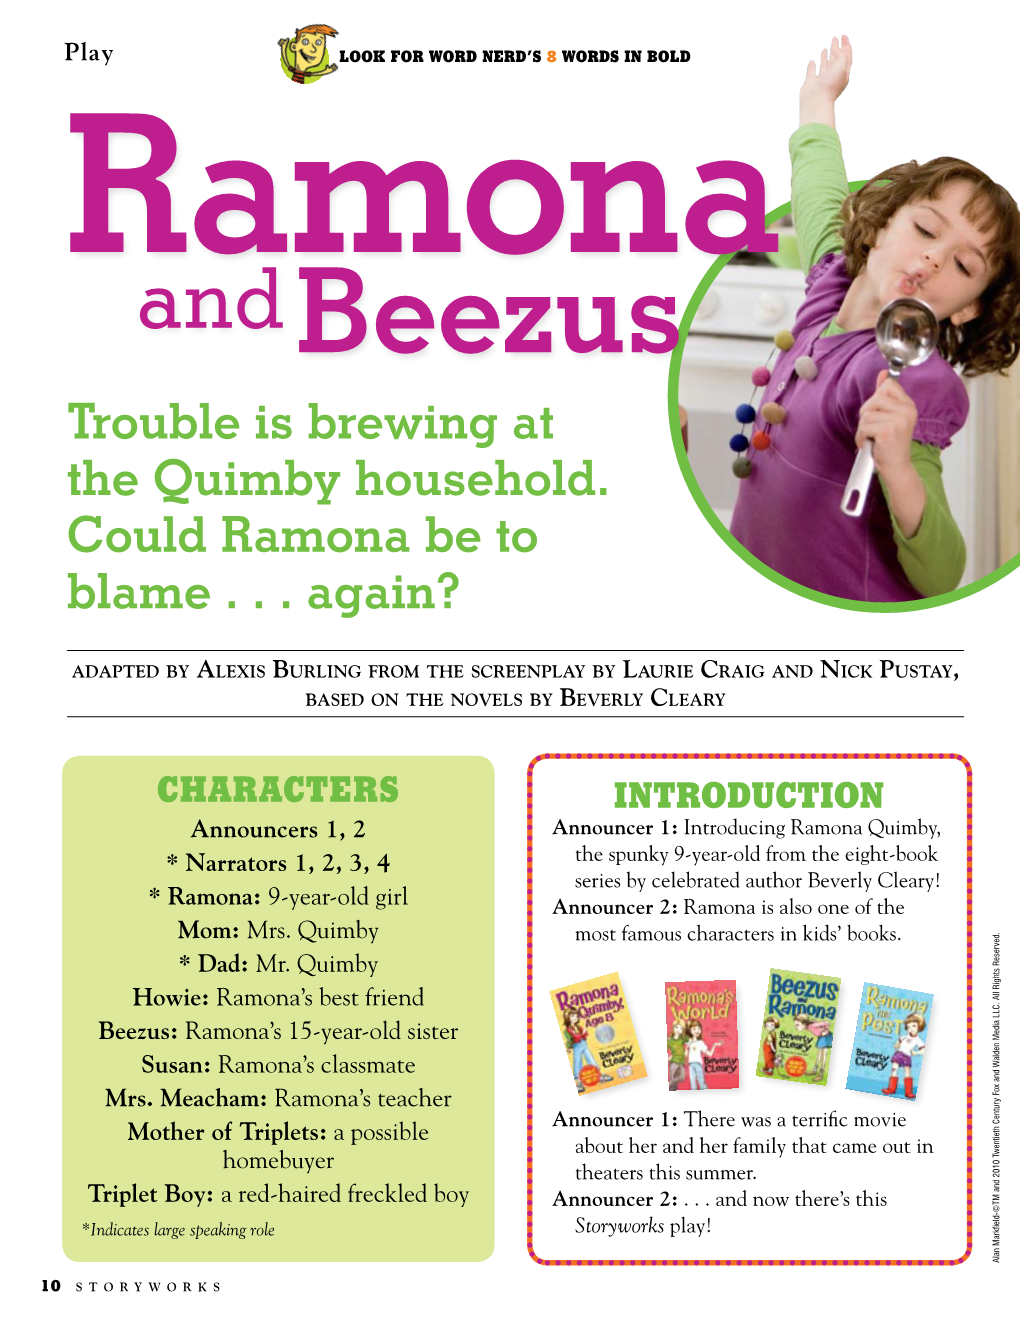 Ramona and Beezus Then, Because Beezus Is So Perfect! Race to Meet Their Dad Narrator 1: Ramona Storms out of the Room